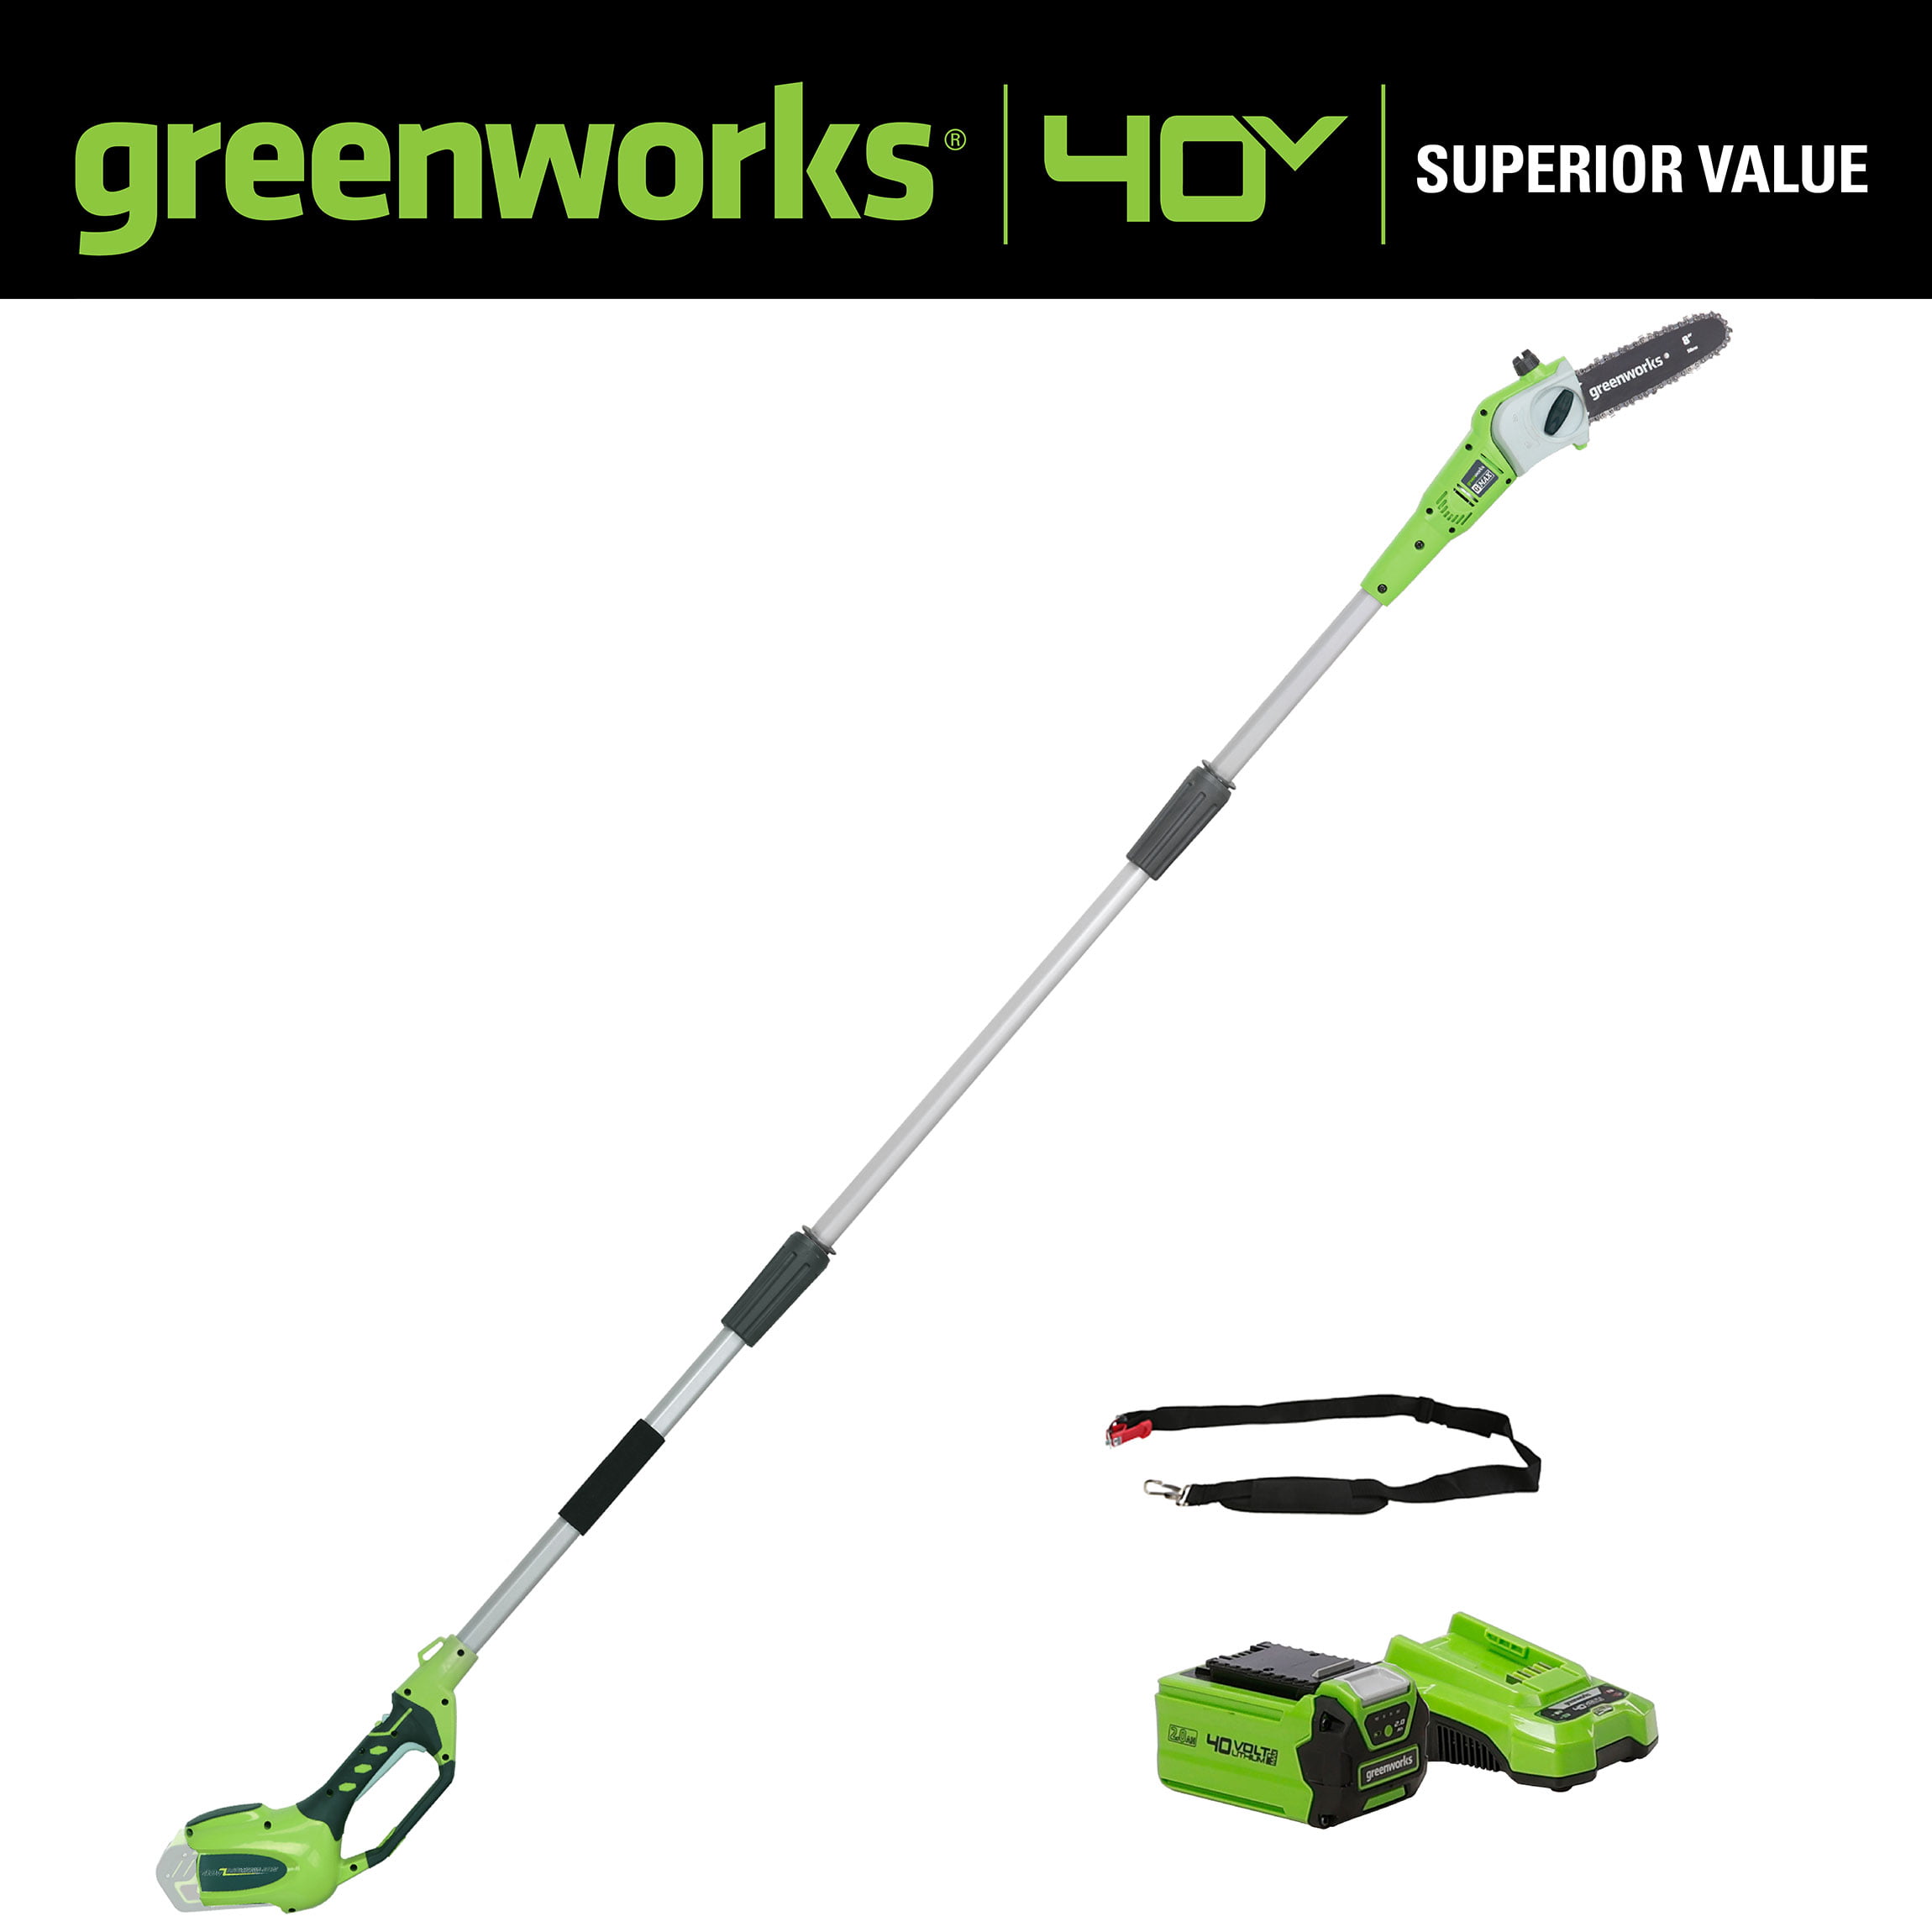 Greenworks 8.5 40V Cordless Pole Saw 2.0 AH Battery Included 20672 Renewed 